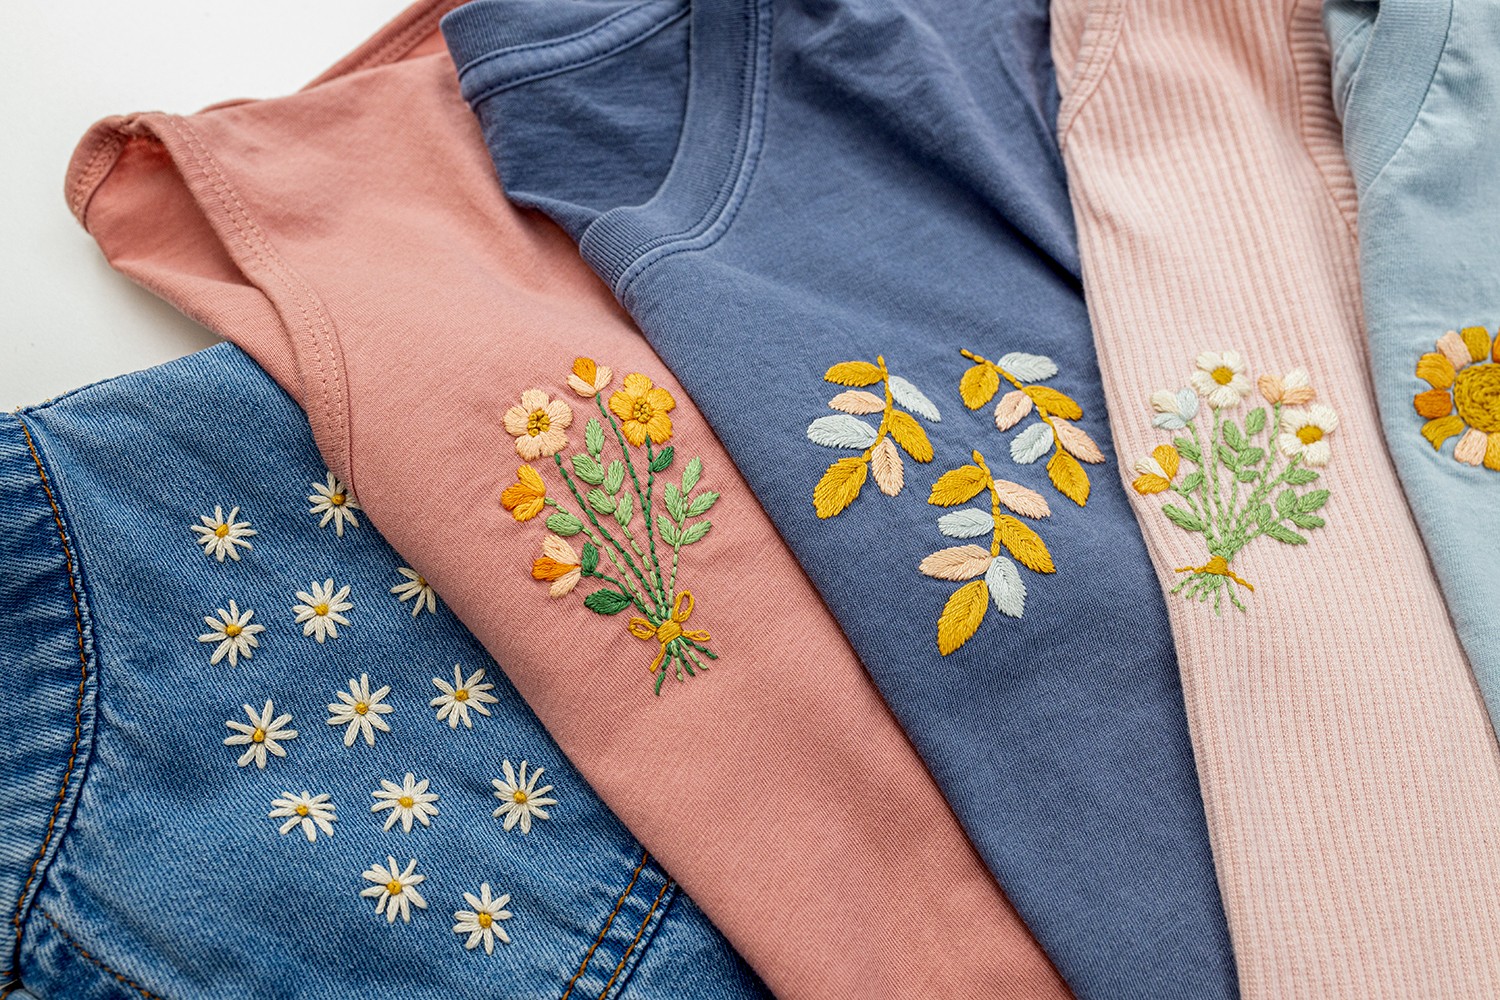 A row of clothing lies with embroidery designs stitched on top.